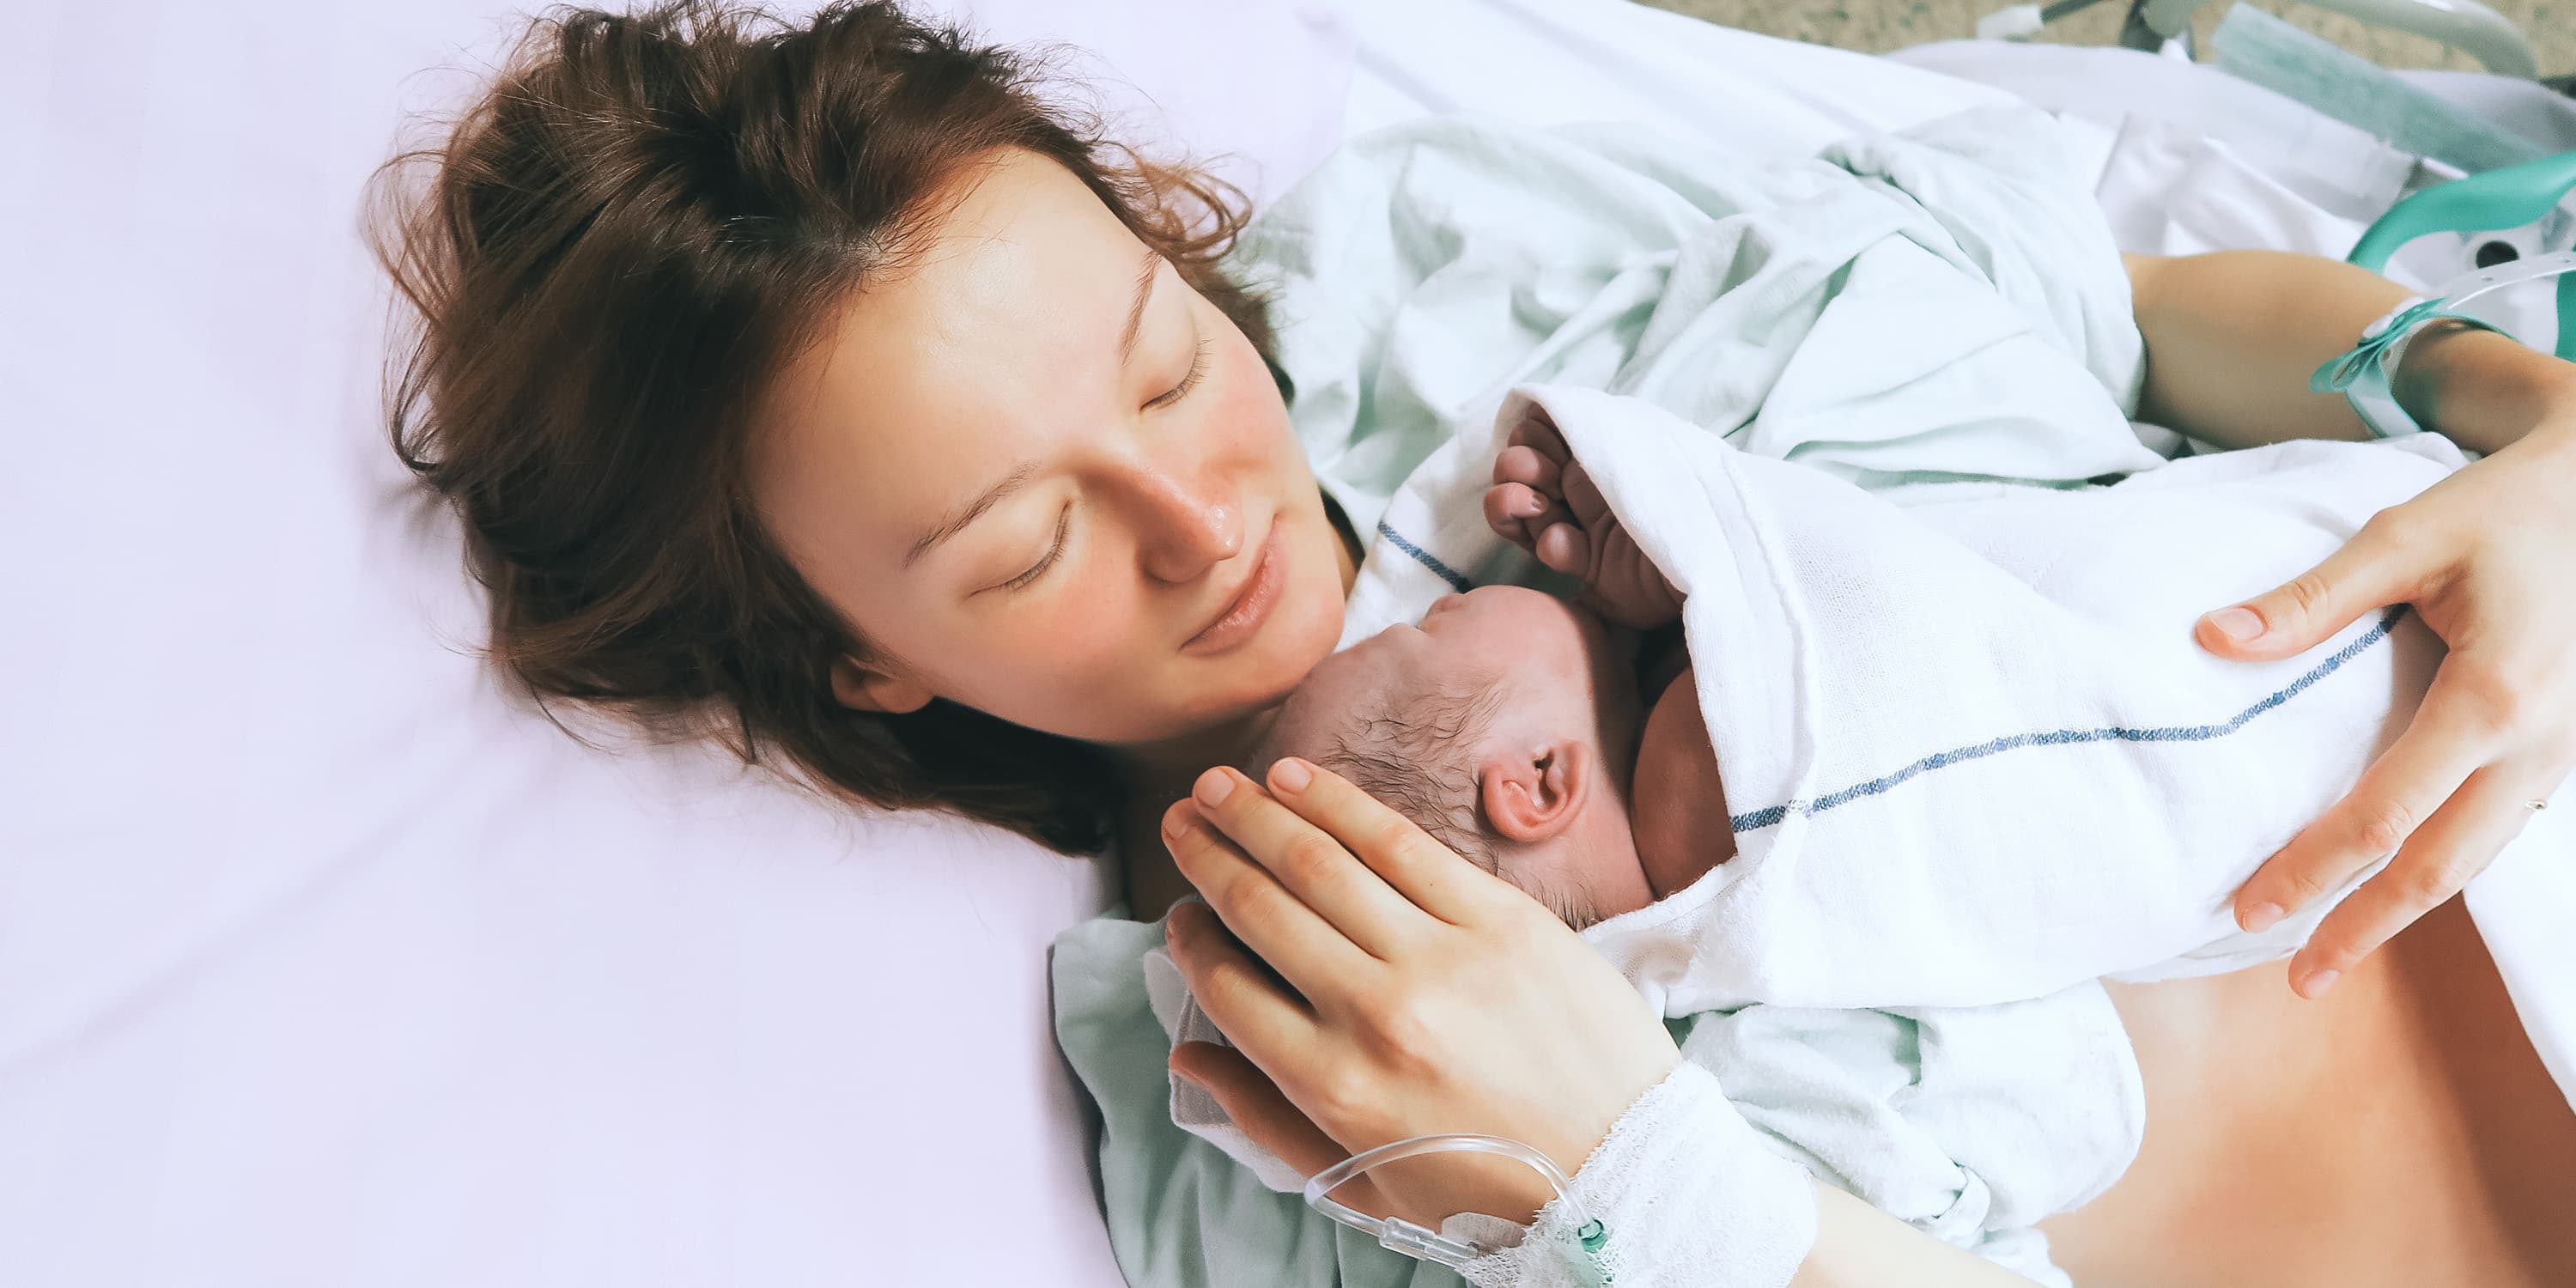 Woman lying in hospital bed holding her newborn baby in her arms